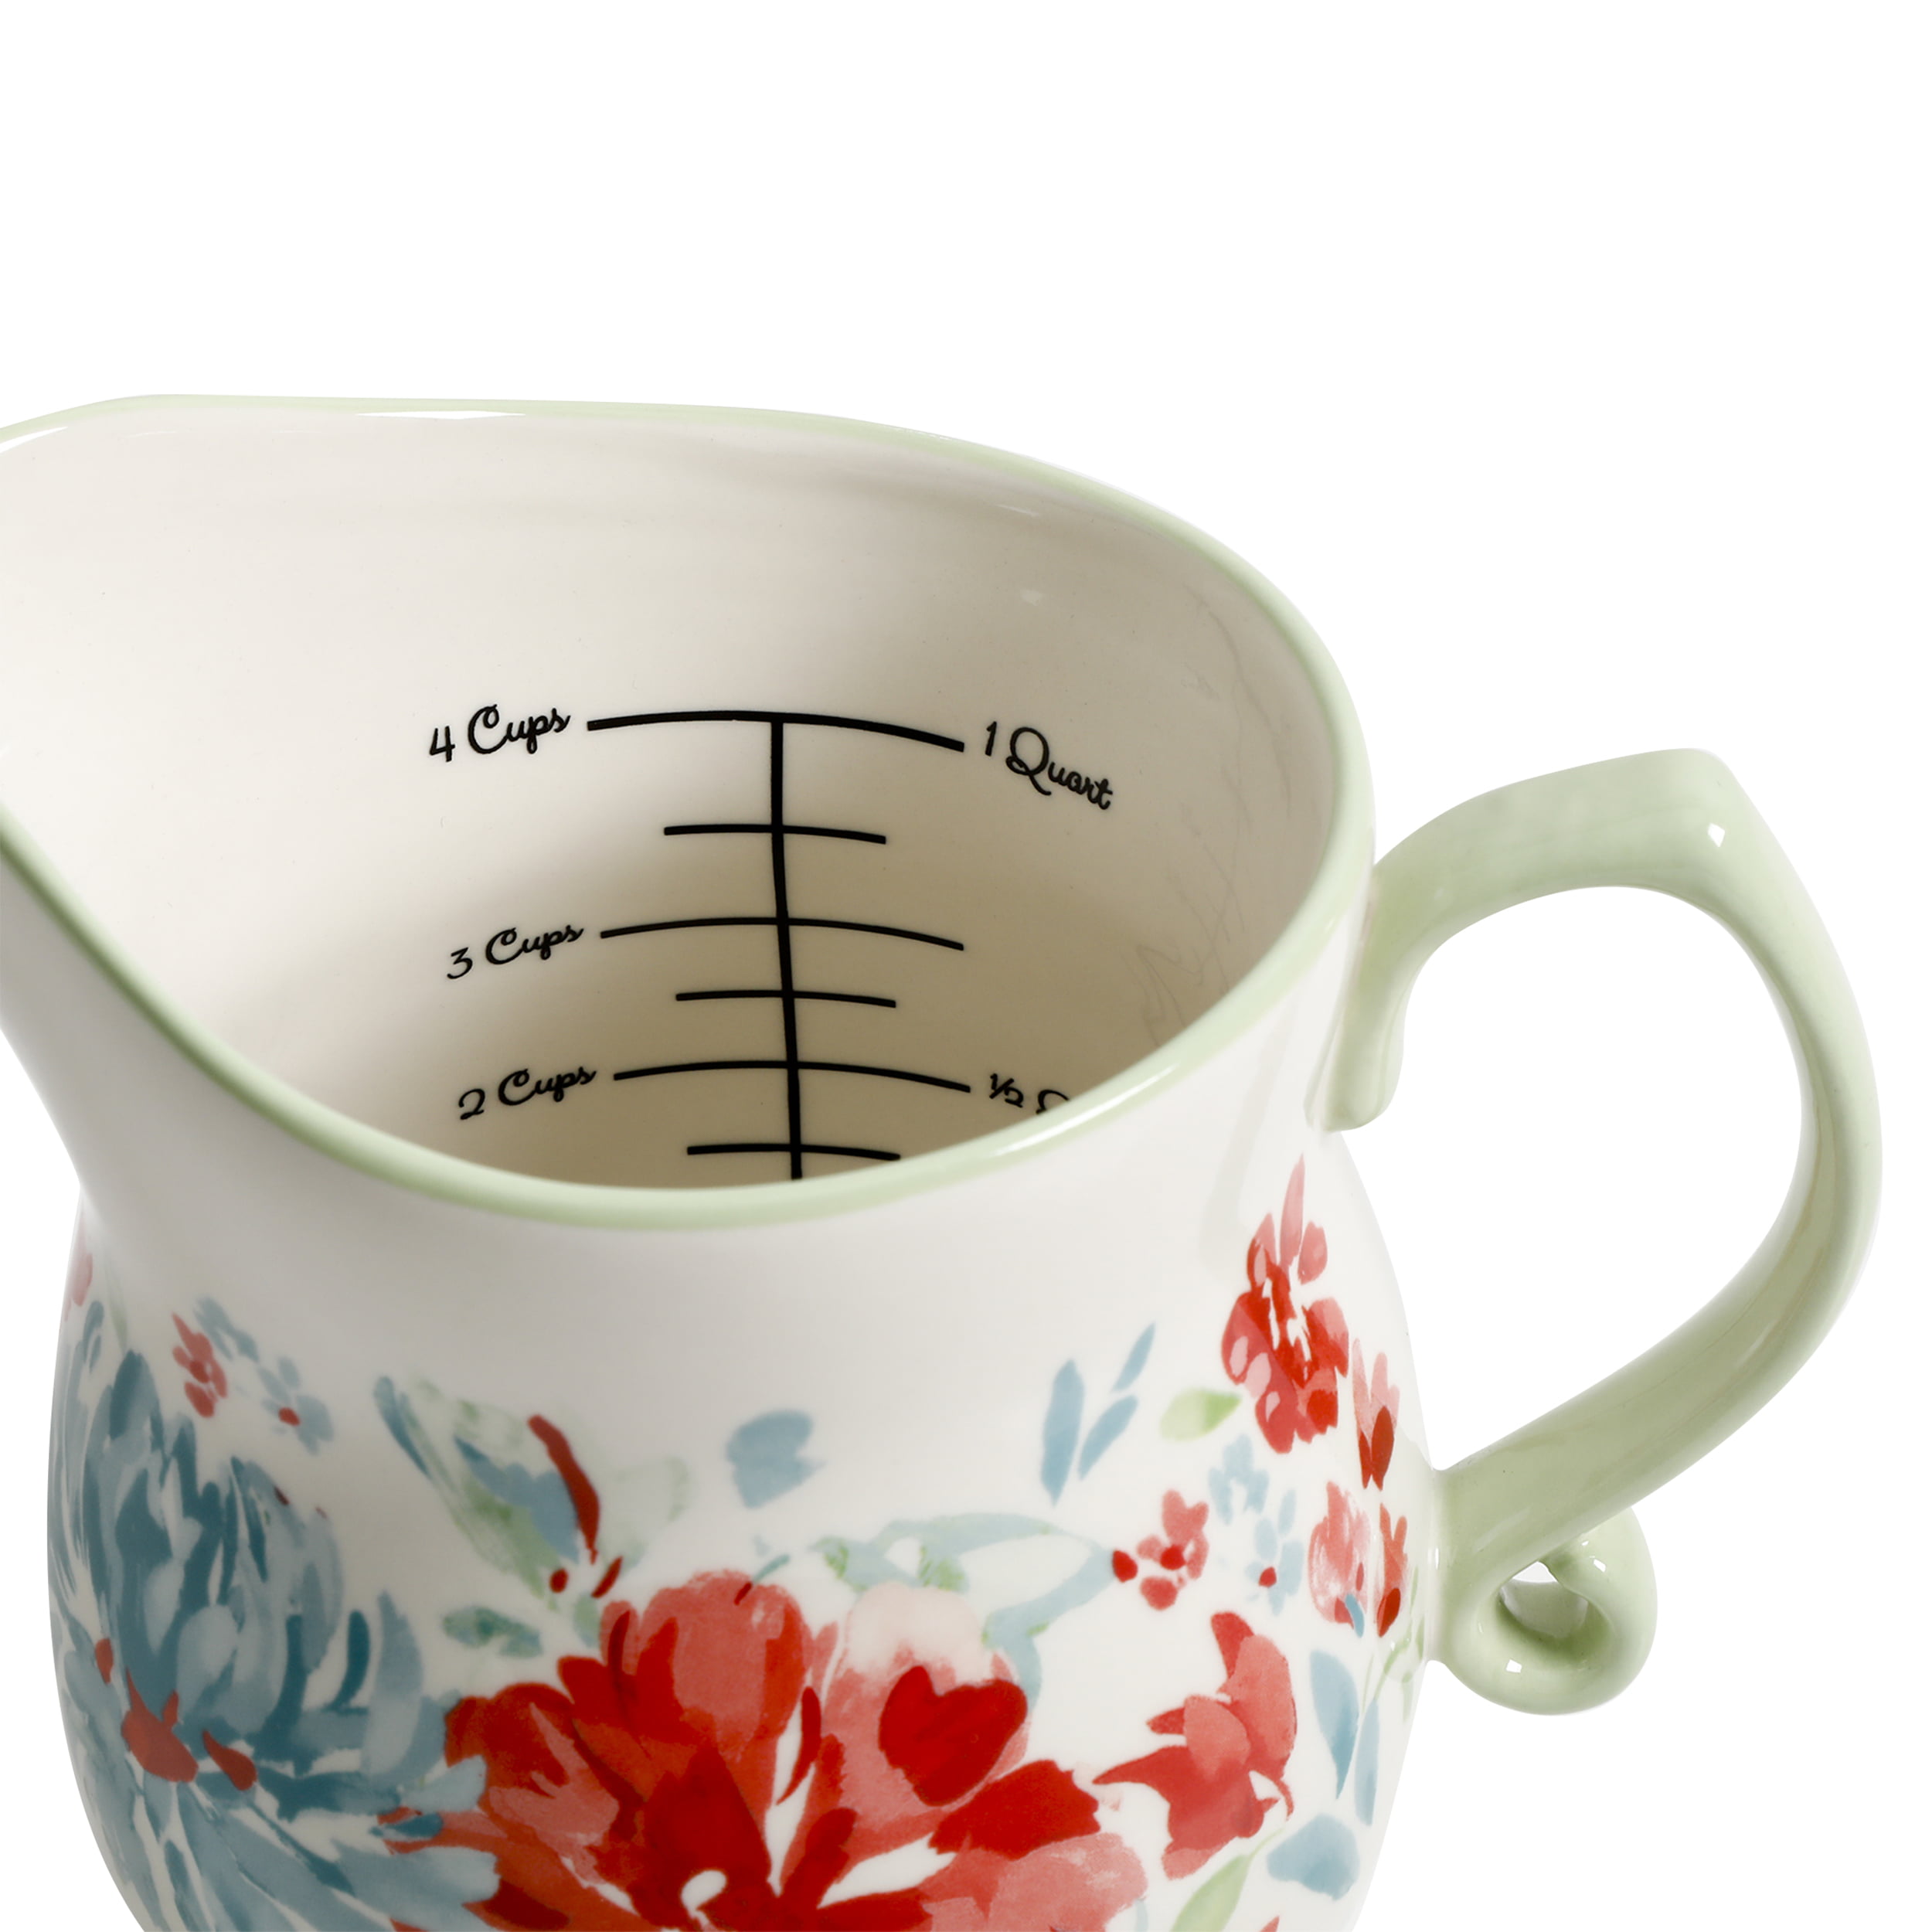 Acadia Measuring Cups, Set of 4